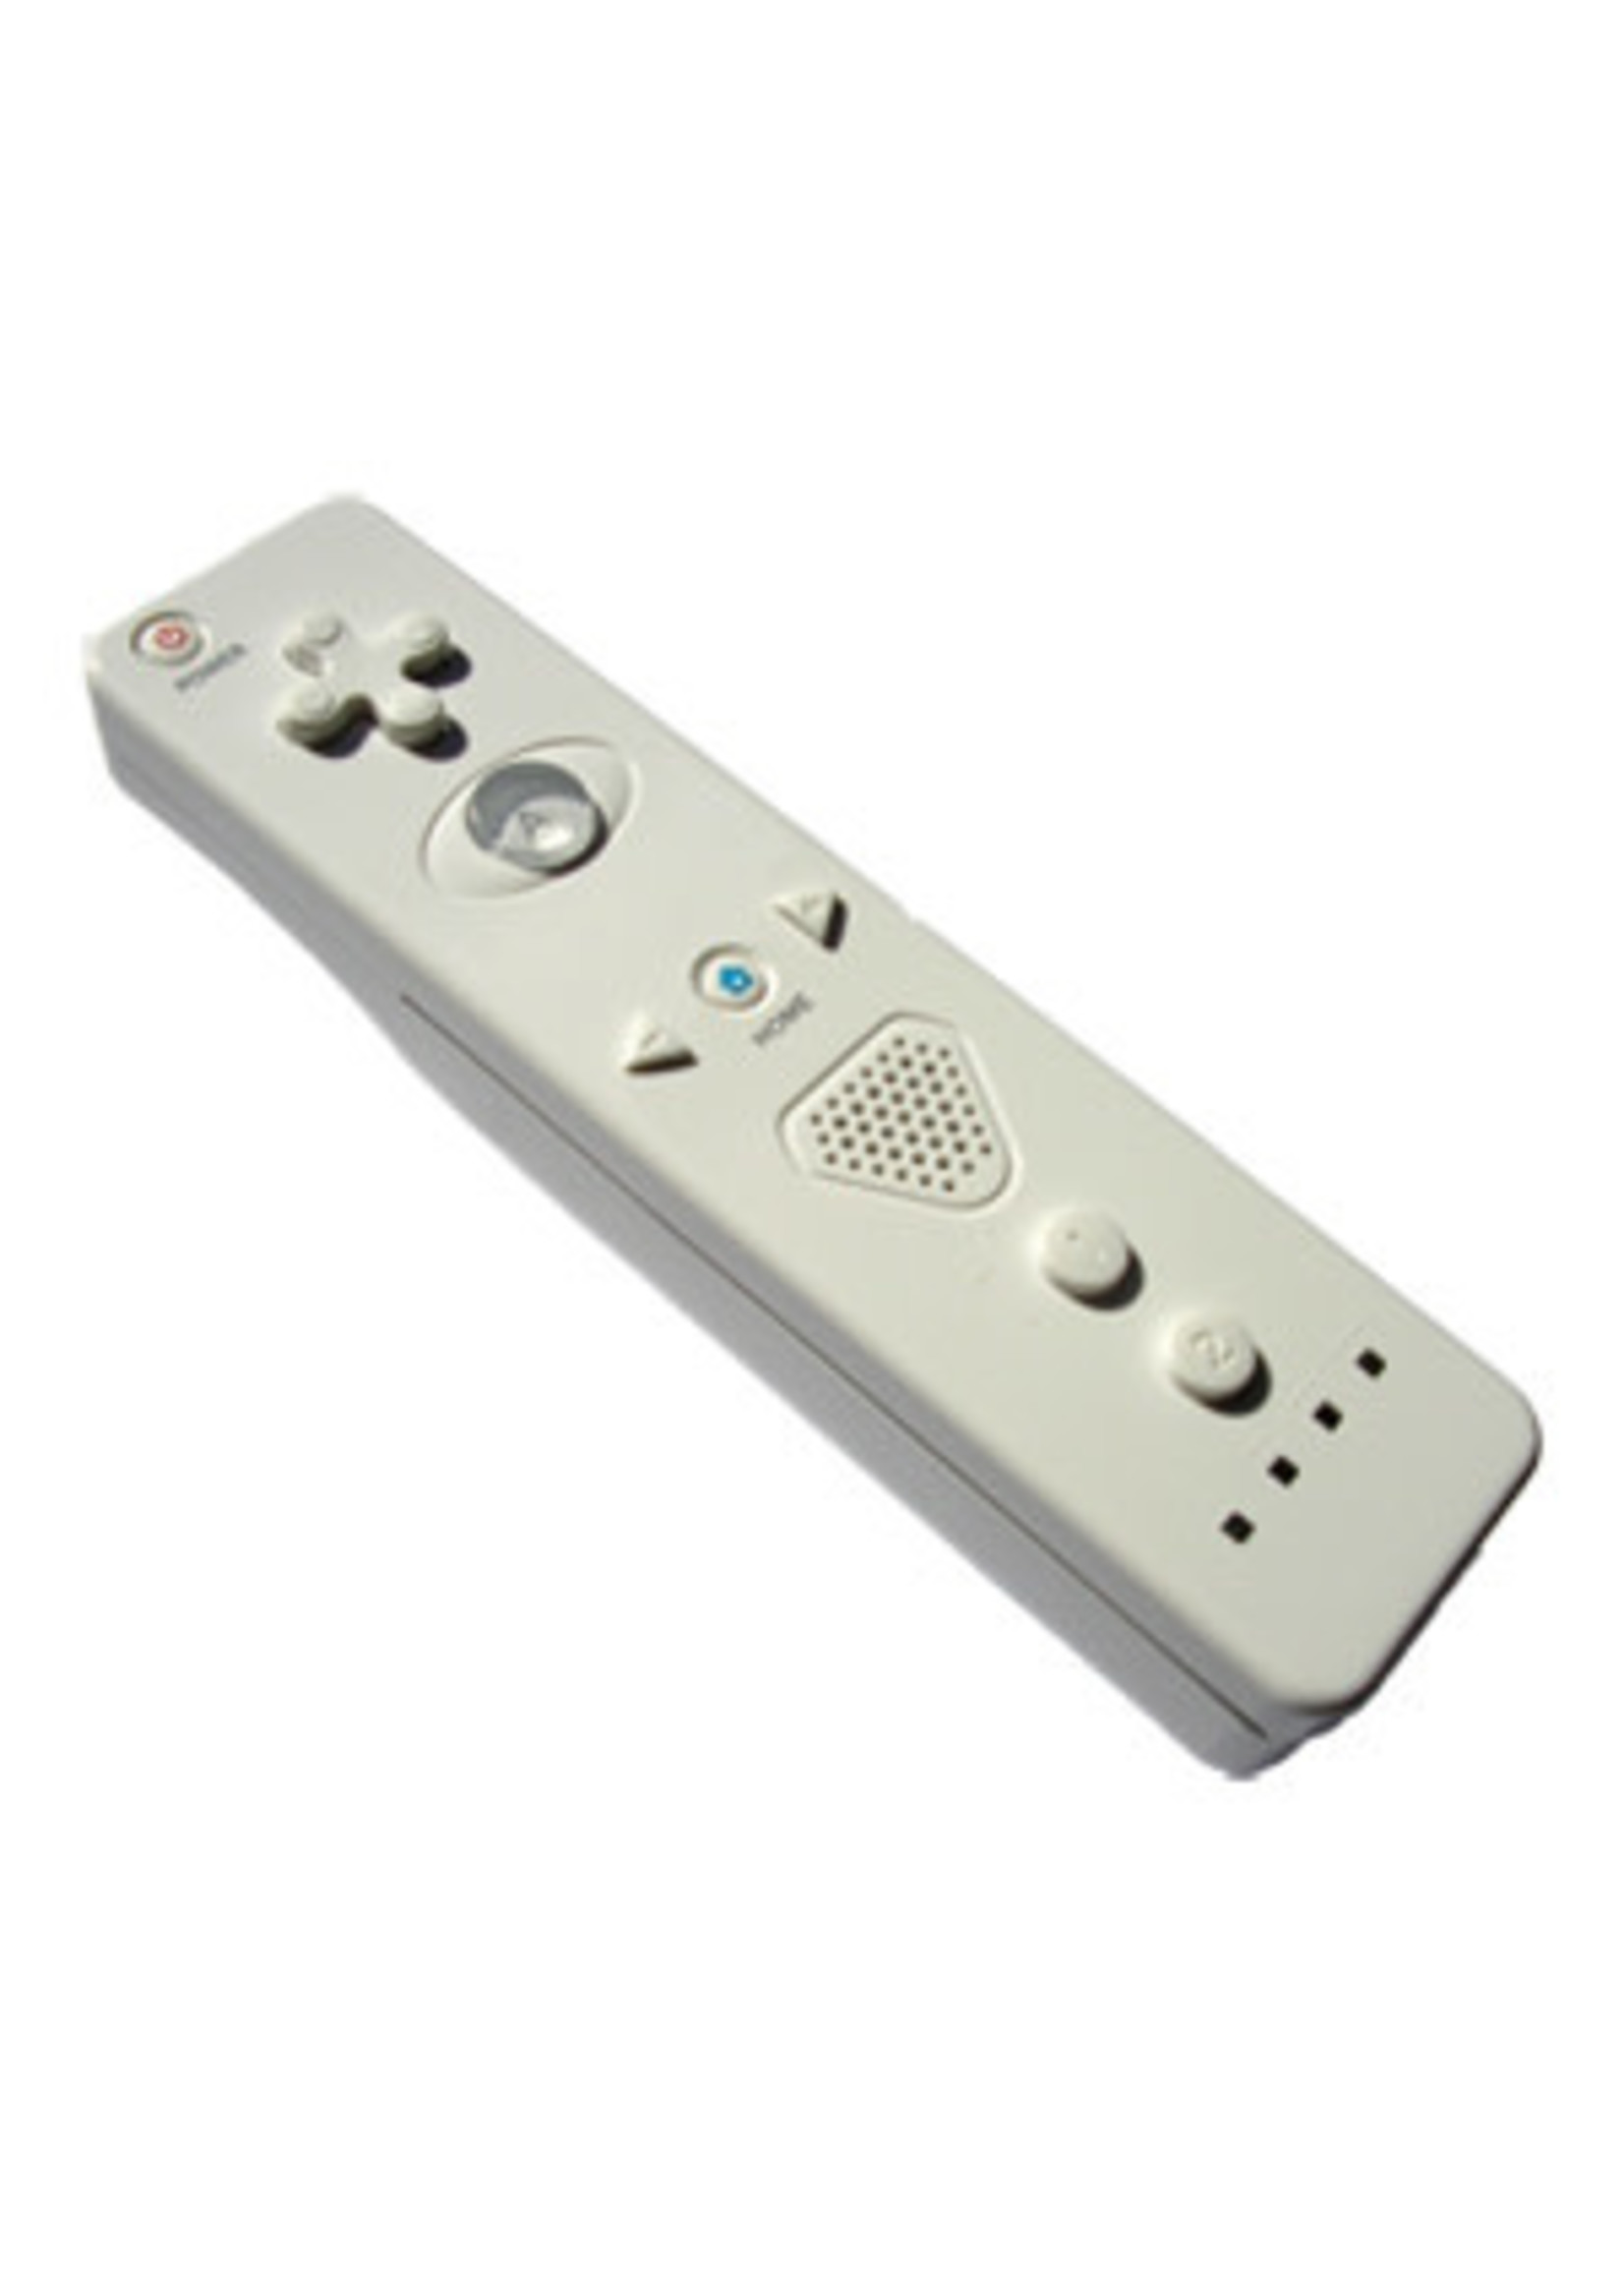 Nintendo Wii Wii 3rd-Party Remote Controller (Used)